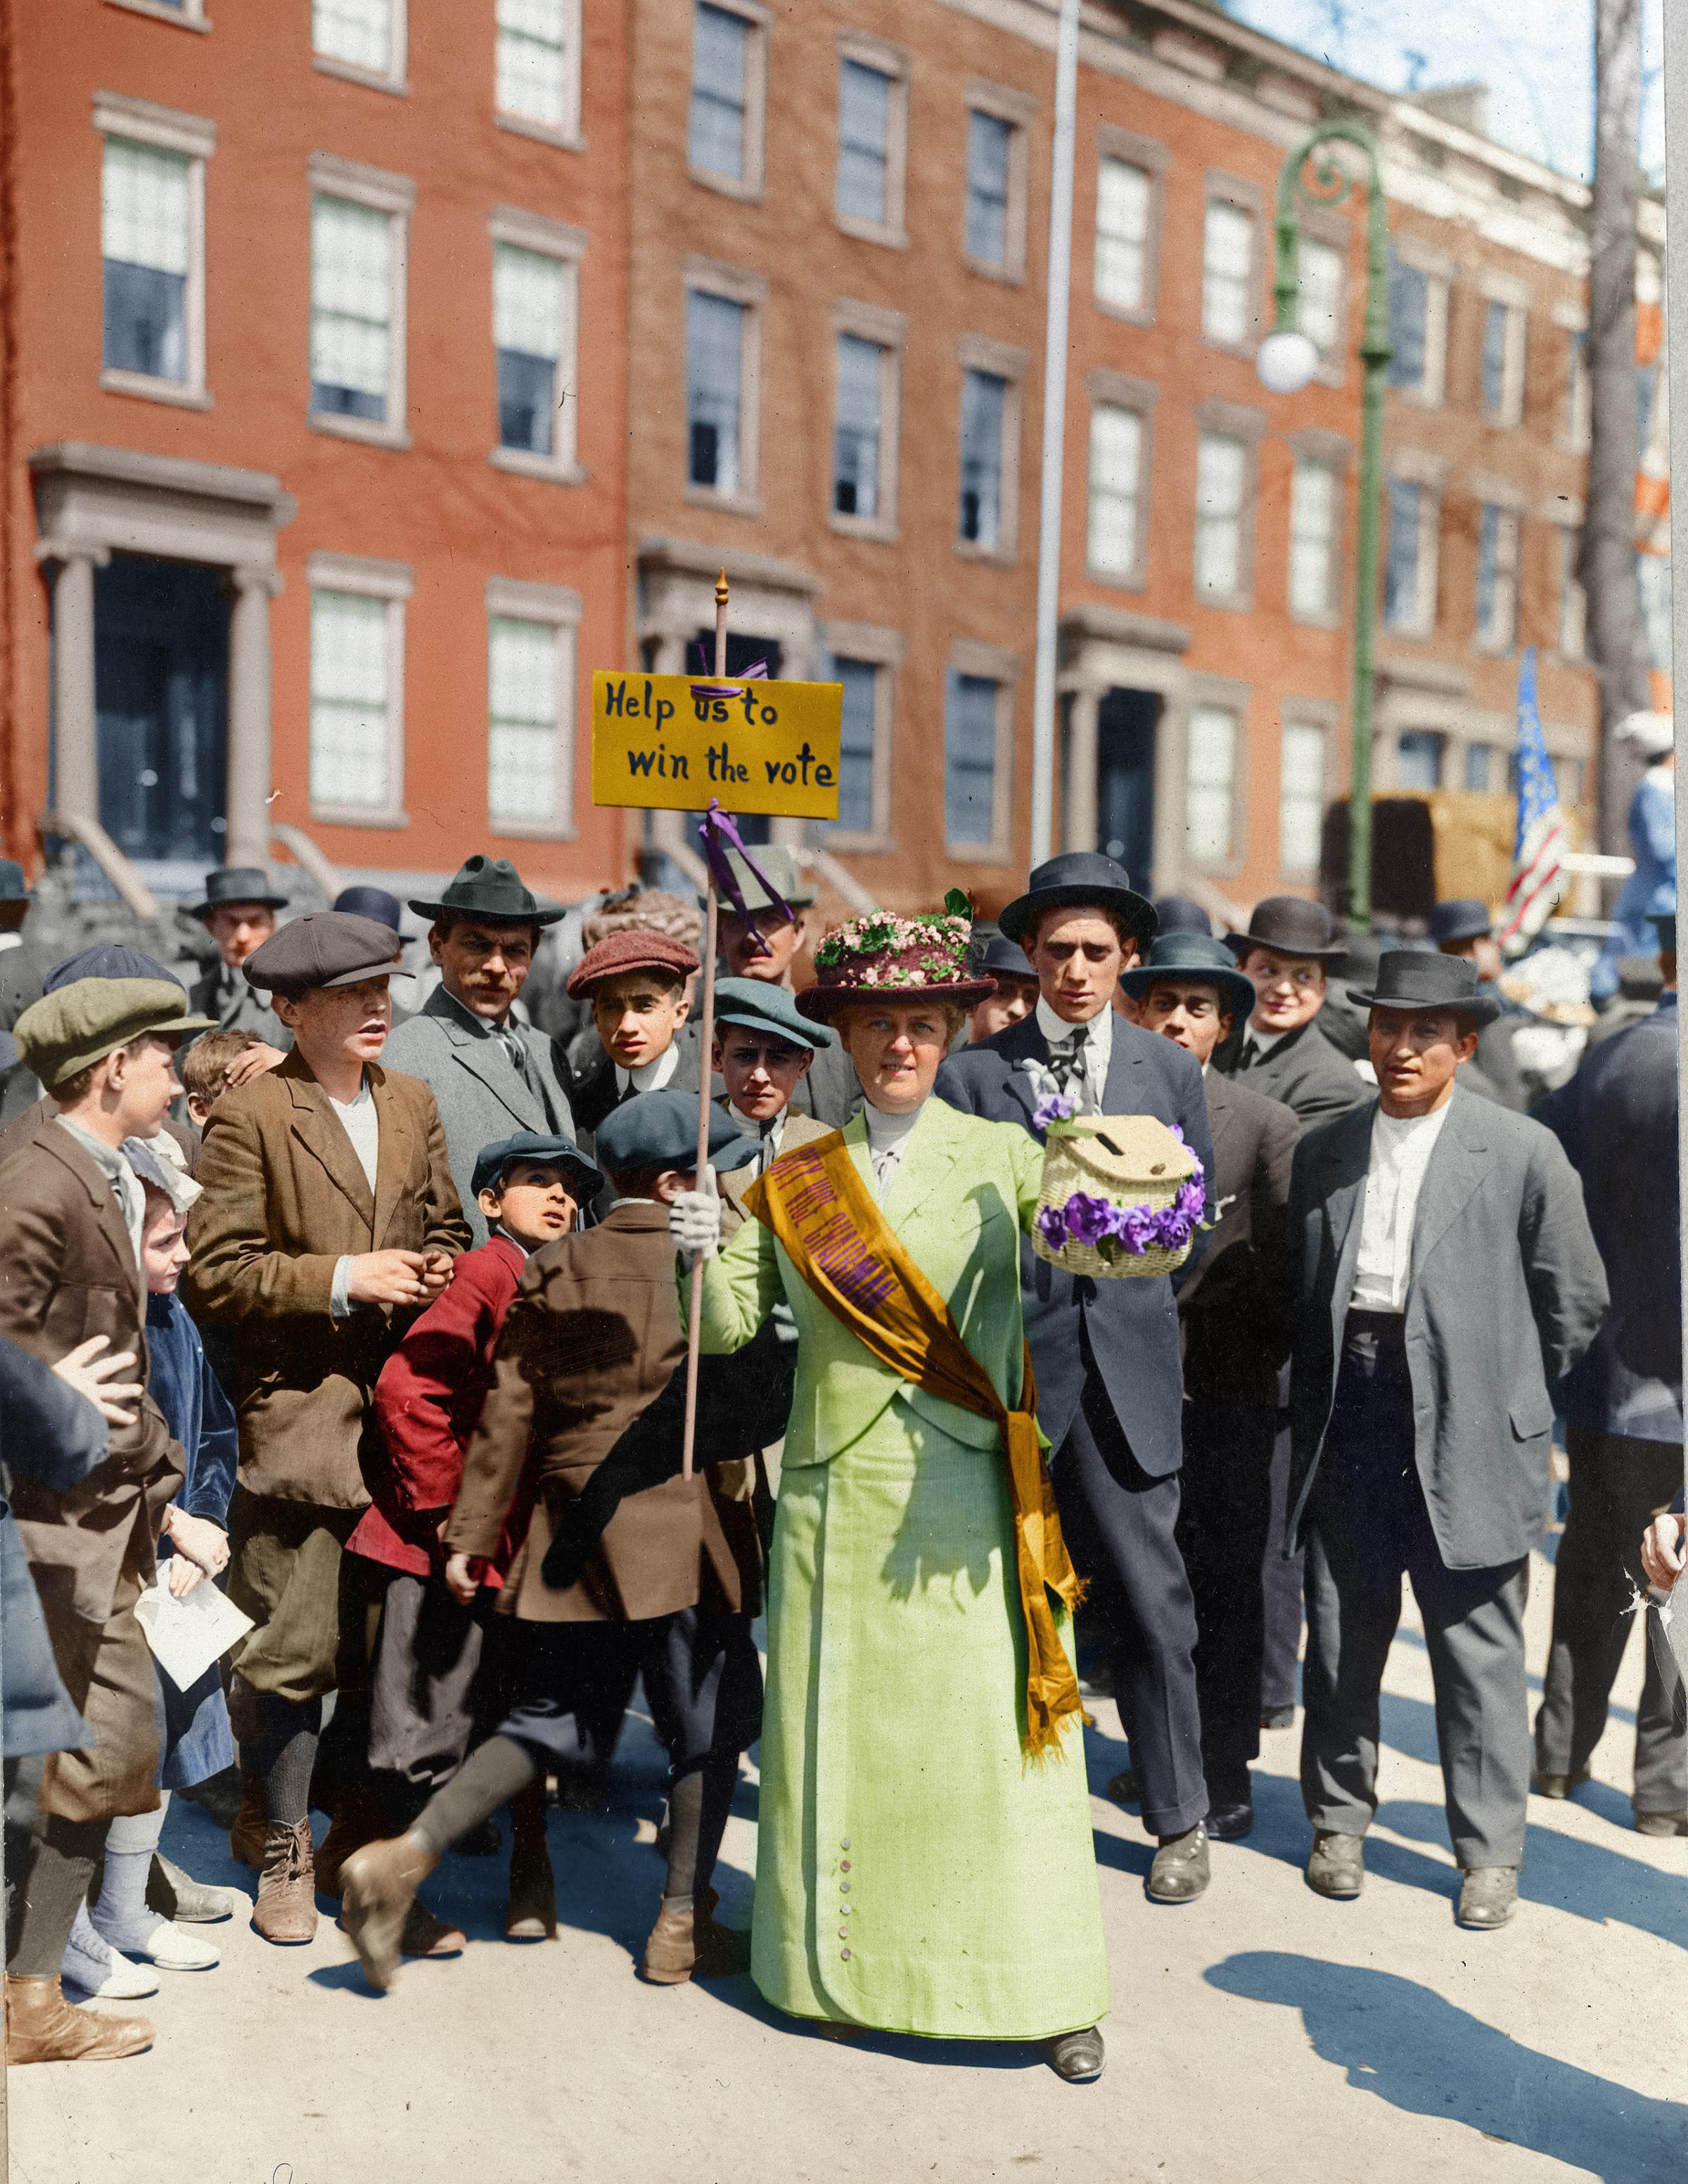 Mrs. Suffern wearing a sash and carrying a sign that says "Help us to win the vote," surrounded by a crowd of men and boys at a Women's Suffrage Parade in 1914.